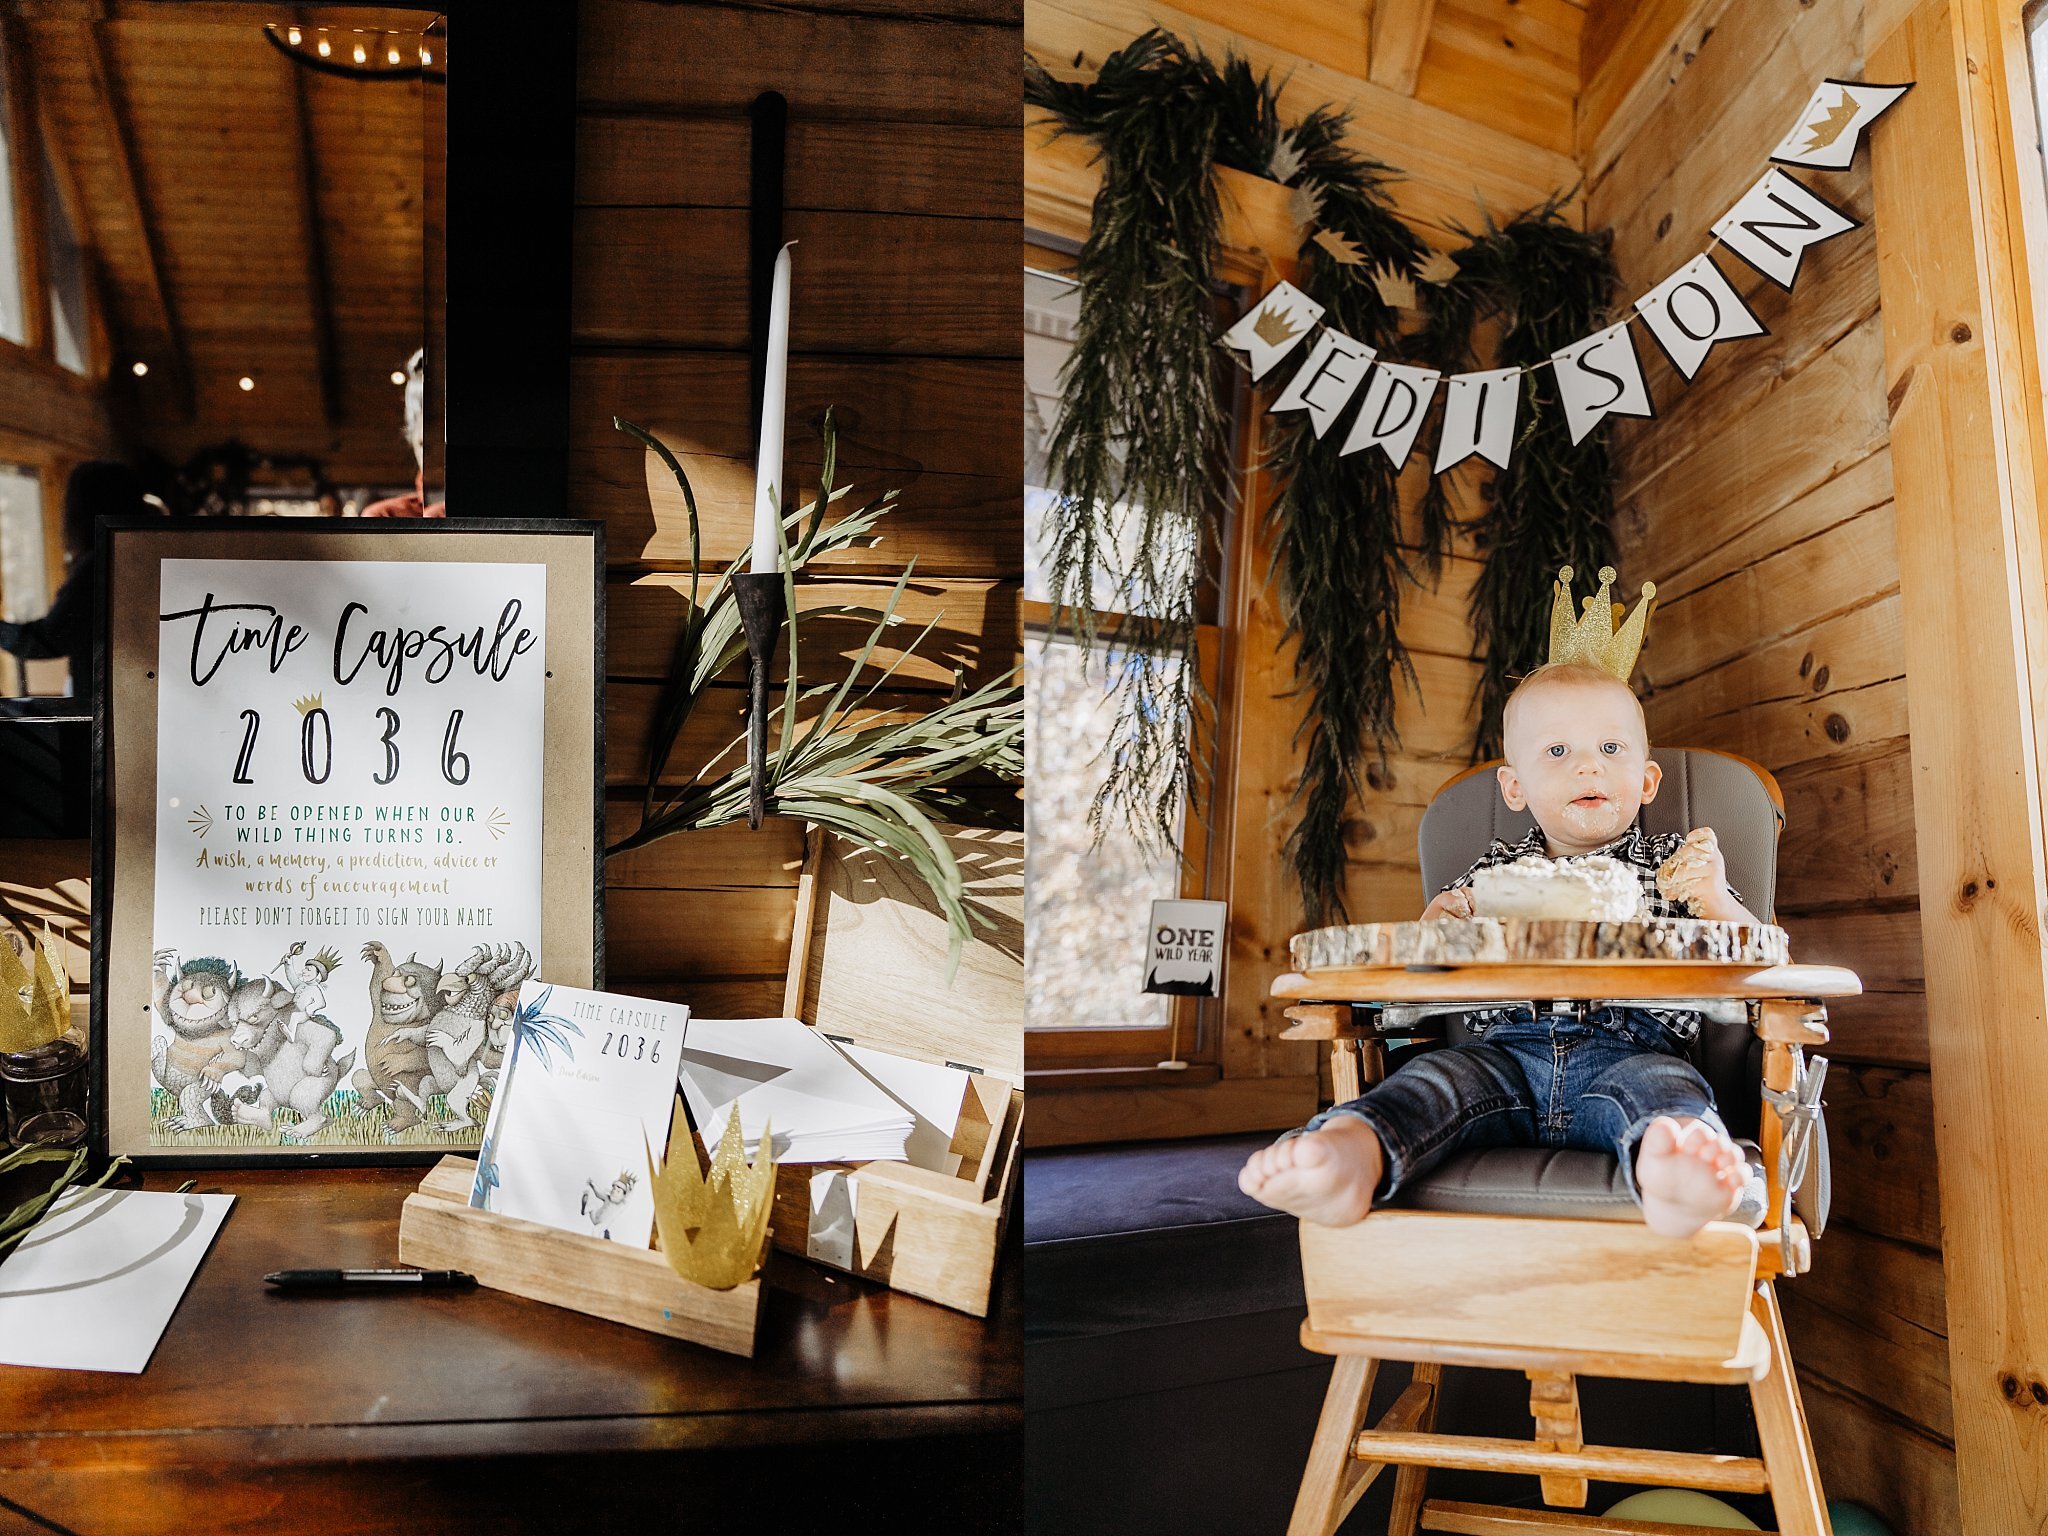 Where the Wild Things Are themed birthday party for one year old boy